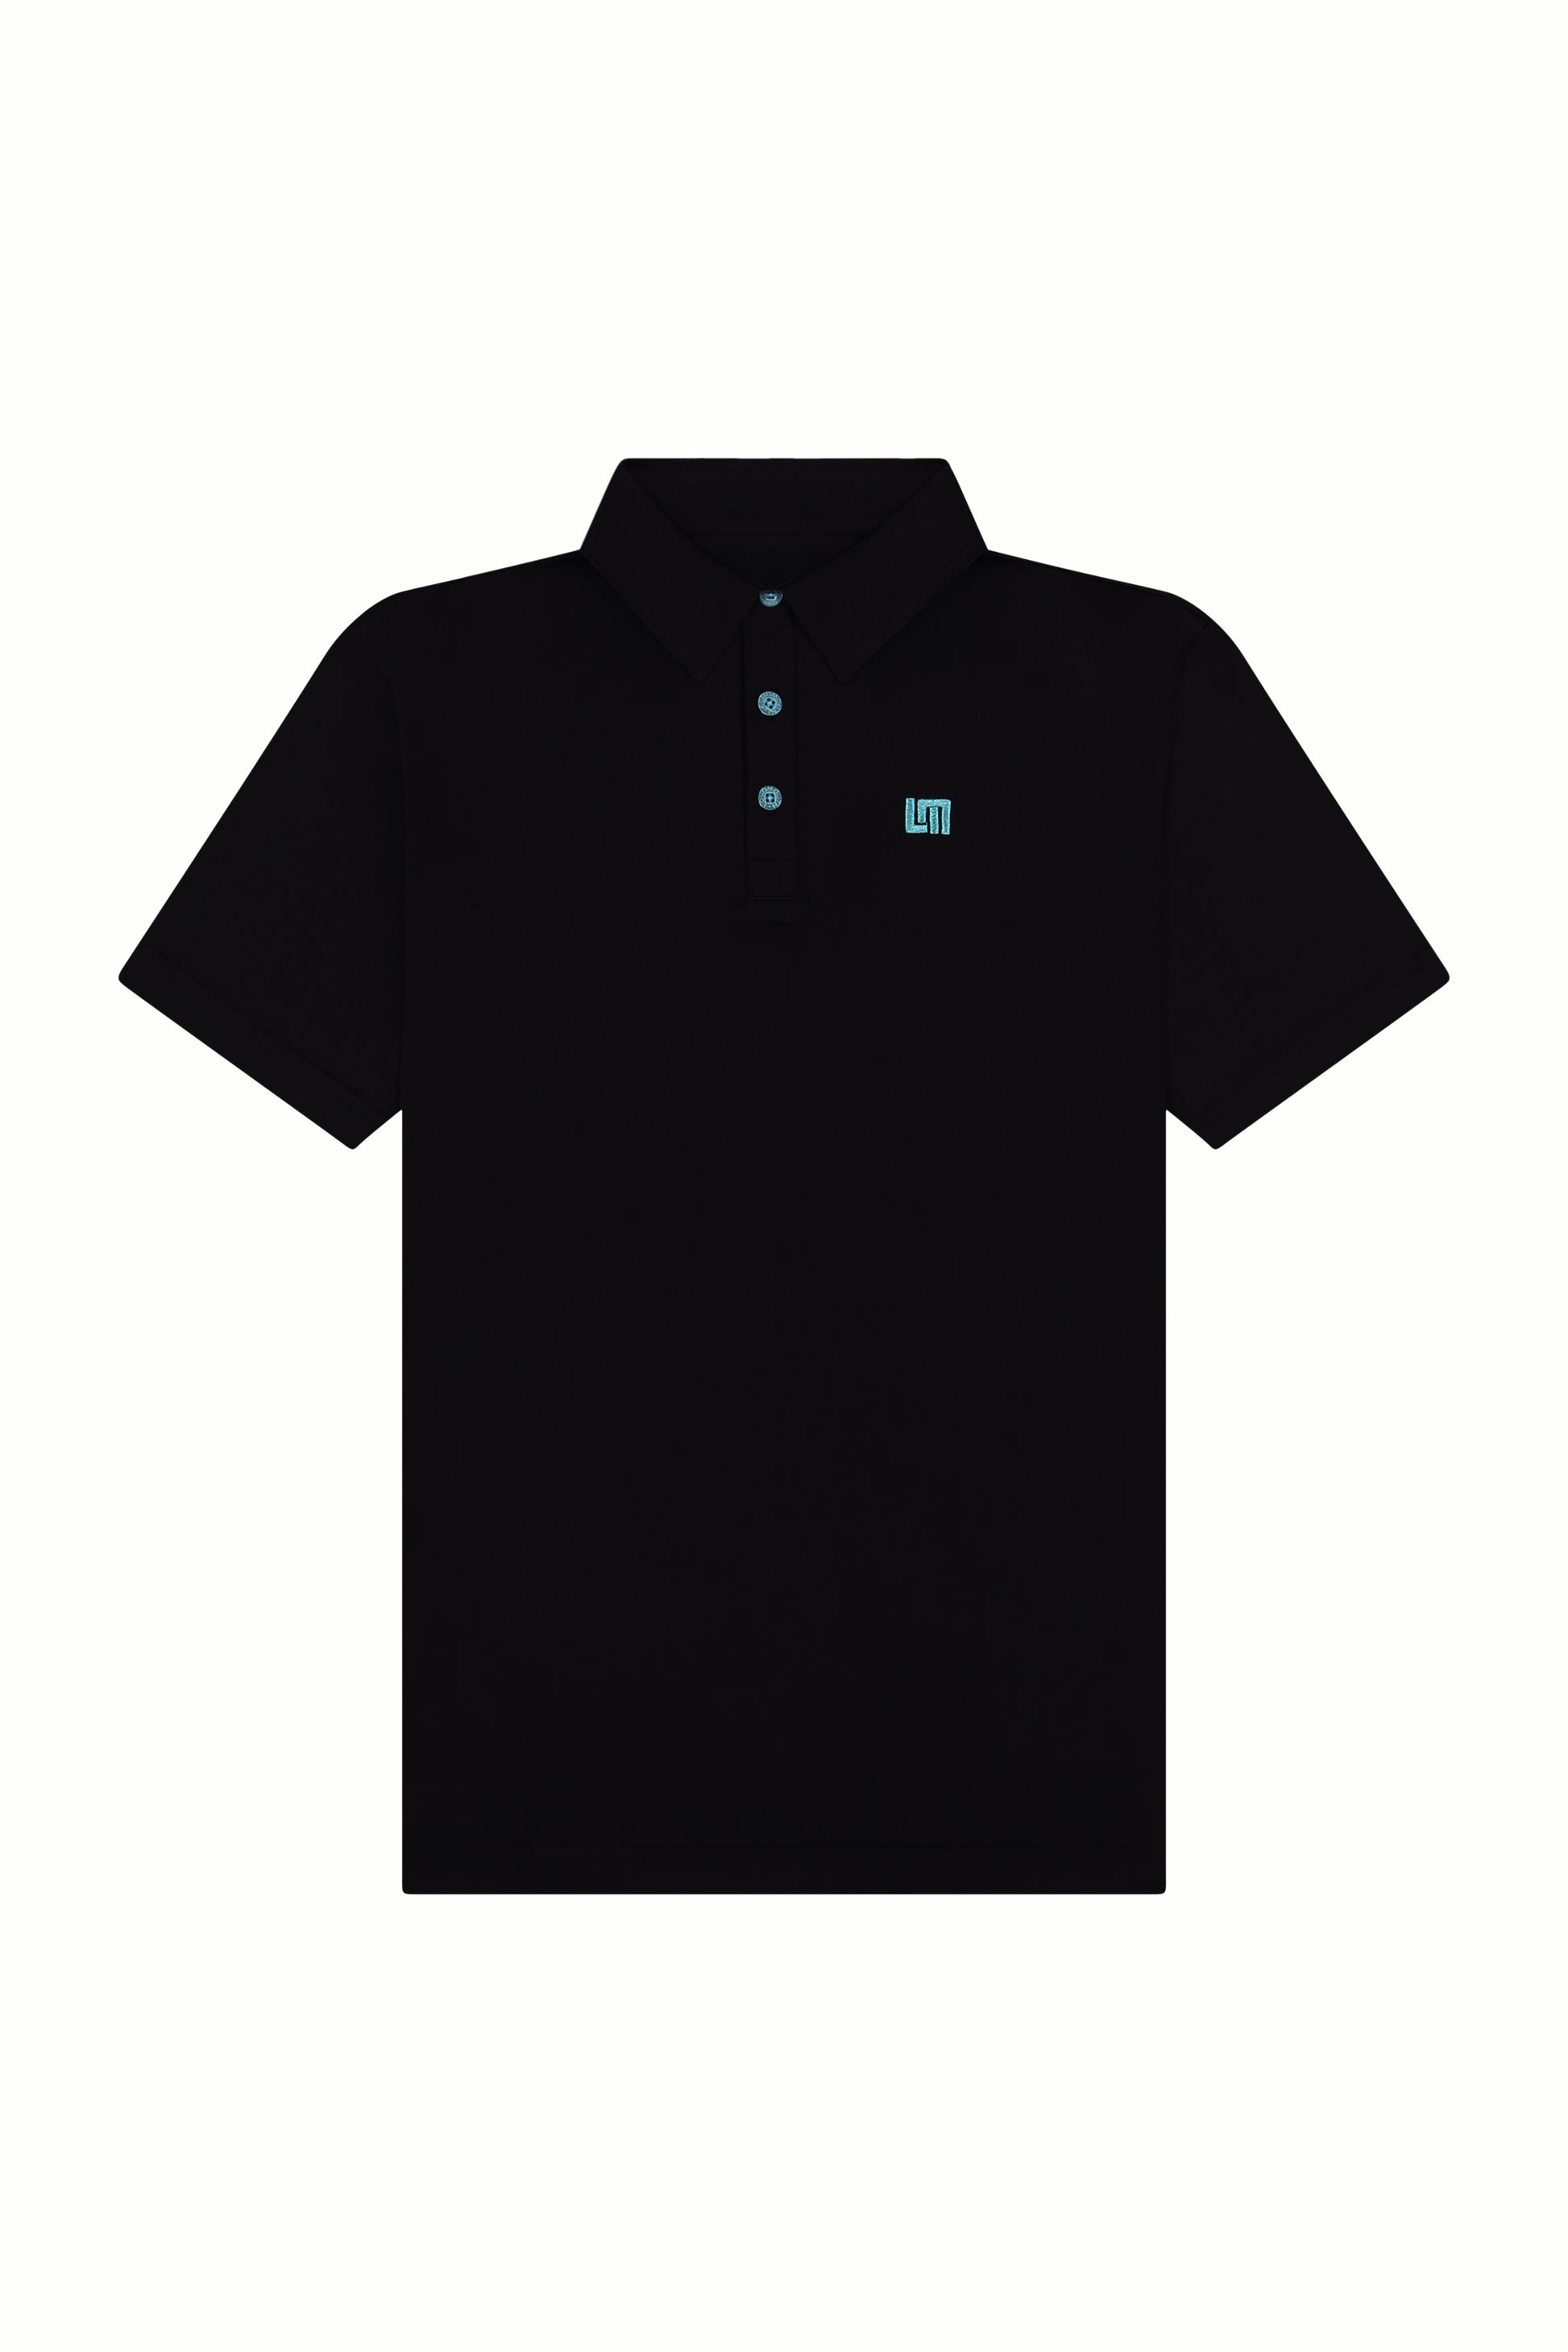 black polo with blue stitching